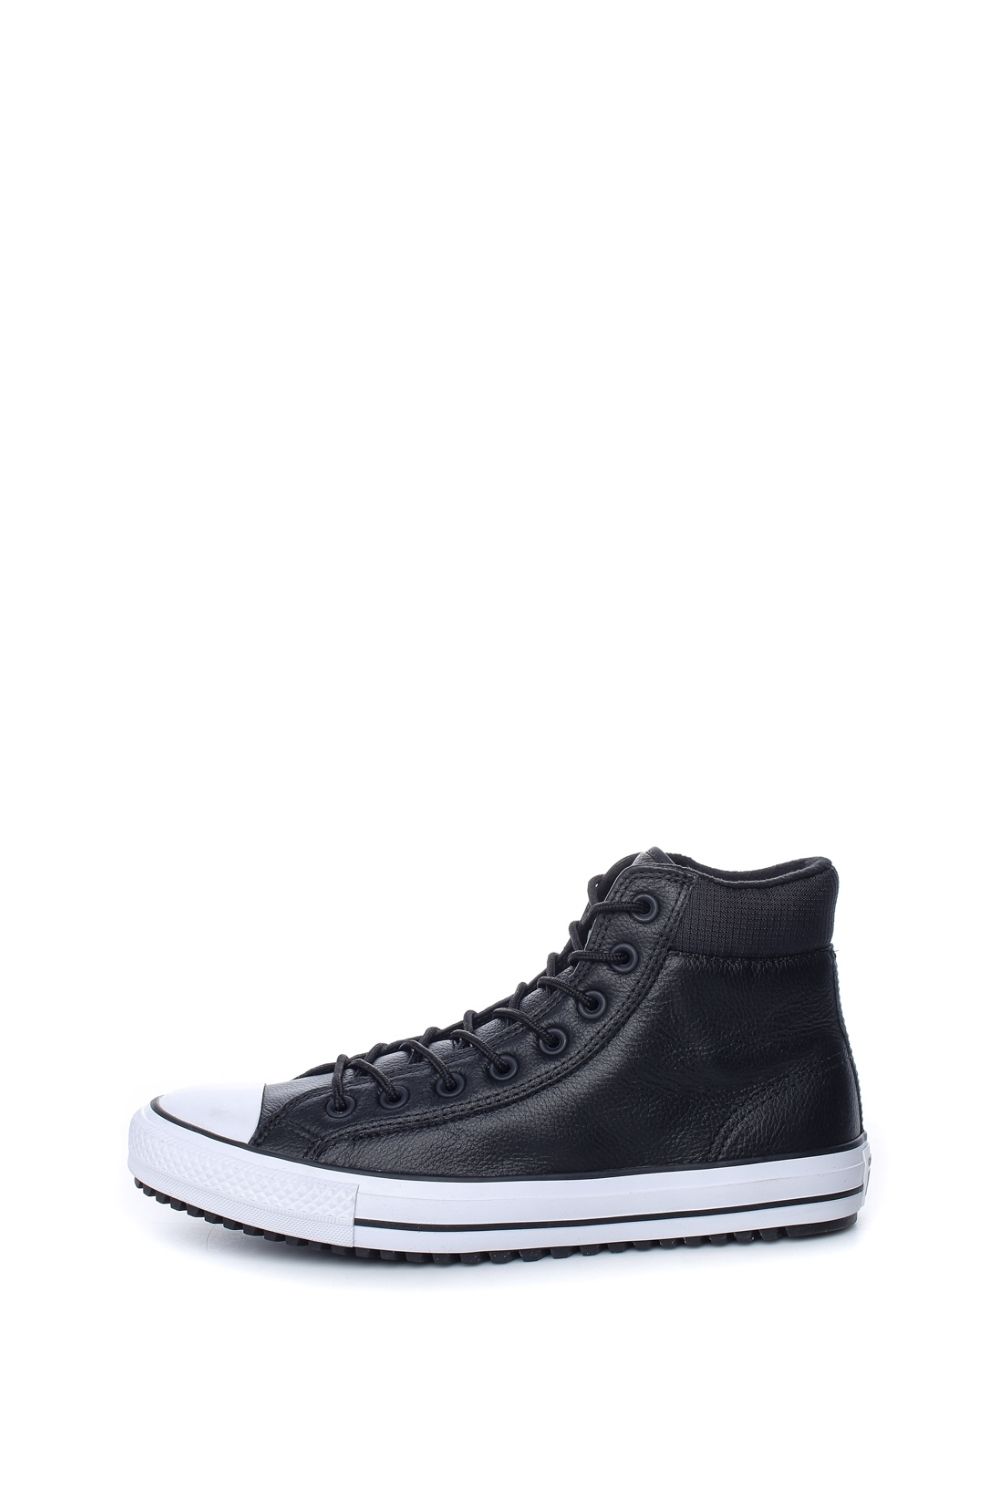 CONVERSE – Unisex ψηλα sneakers CONVERSE CHUCK TAYLOR ALL STAR PC μαυρα